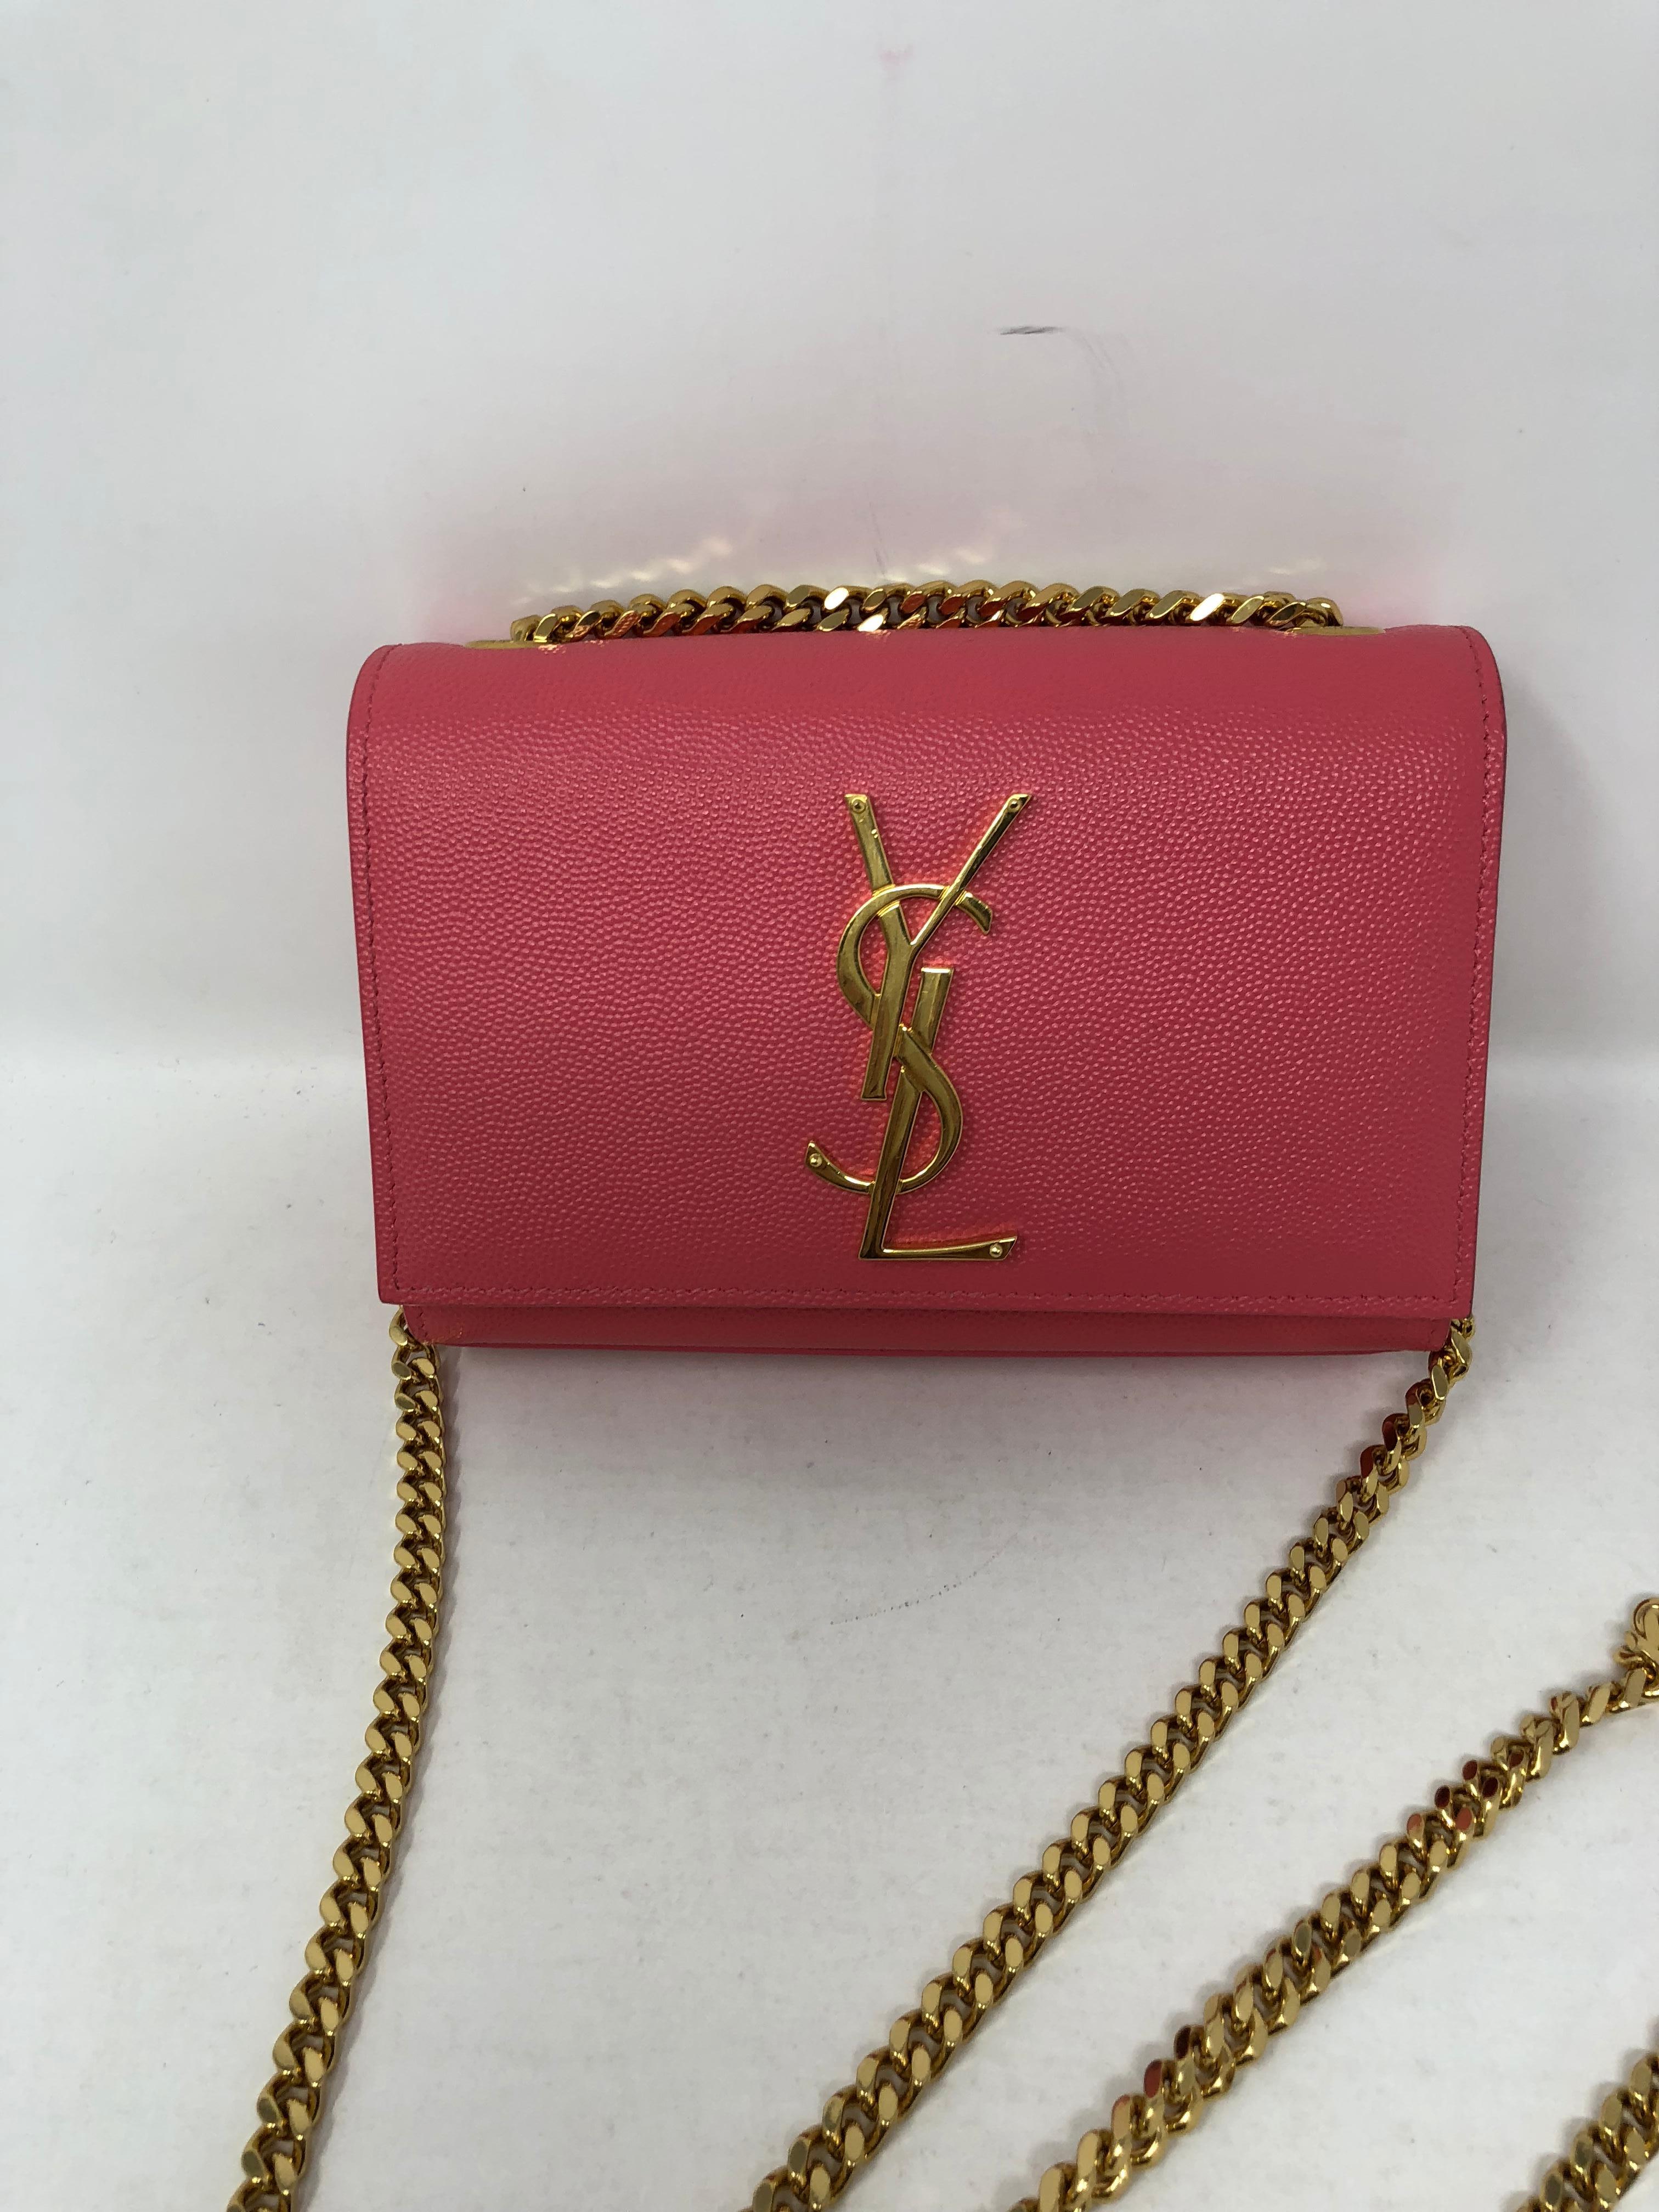 YSL Mini Pink Crossbody with gold signature and chain. Like new and hard to find bag. Can be worn as a clutch and doubled too. The perfect mini bag for evening or any special event. Guaranteed authentic. 